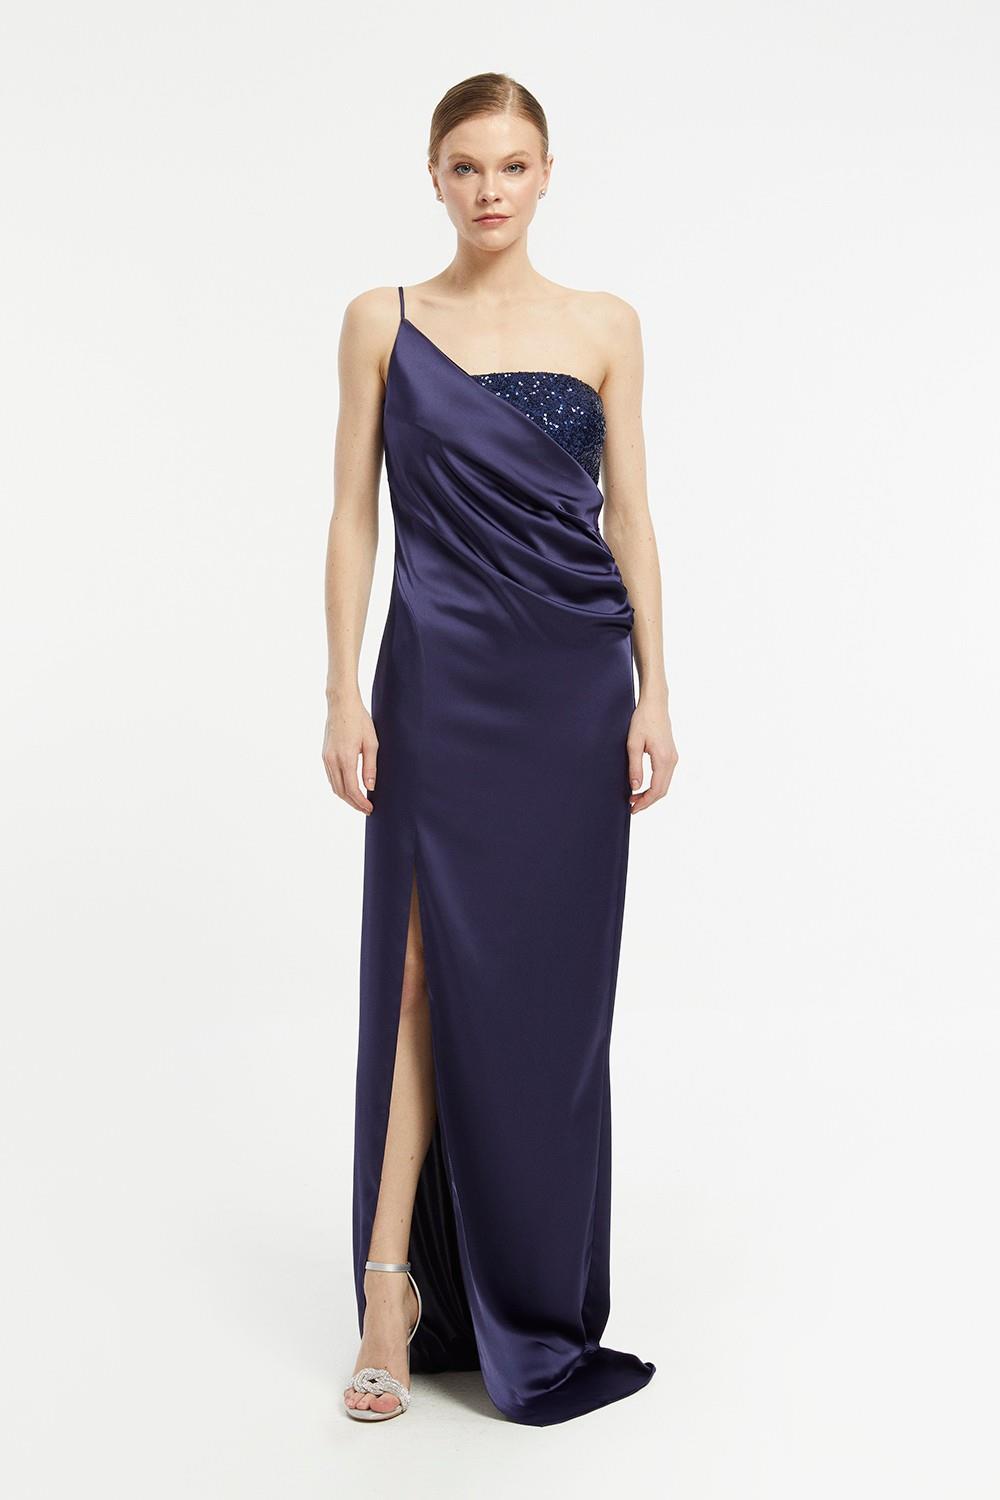 Sequin Top Satin Evening Dress with Slits